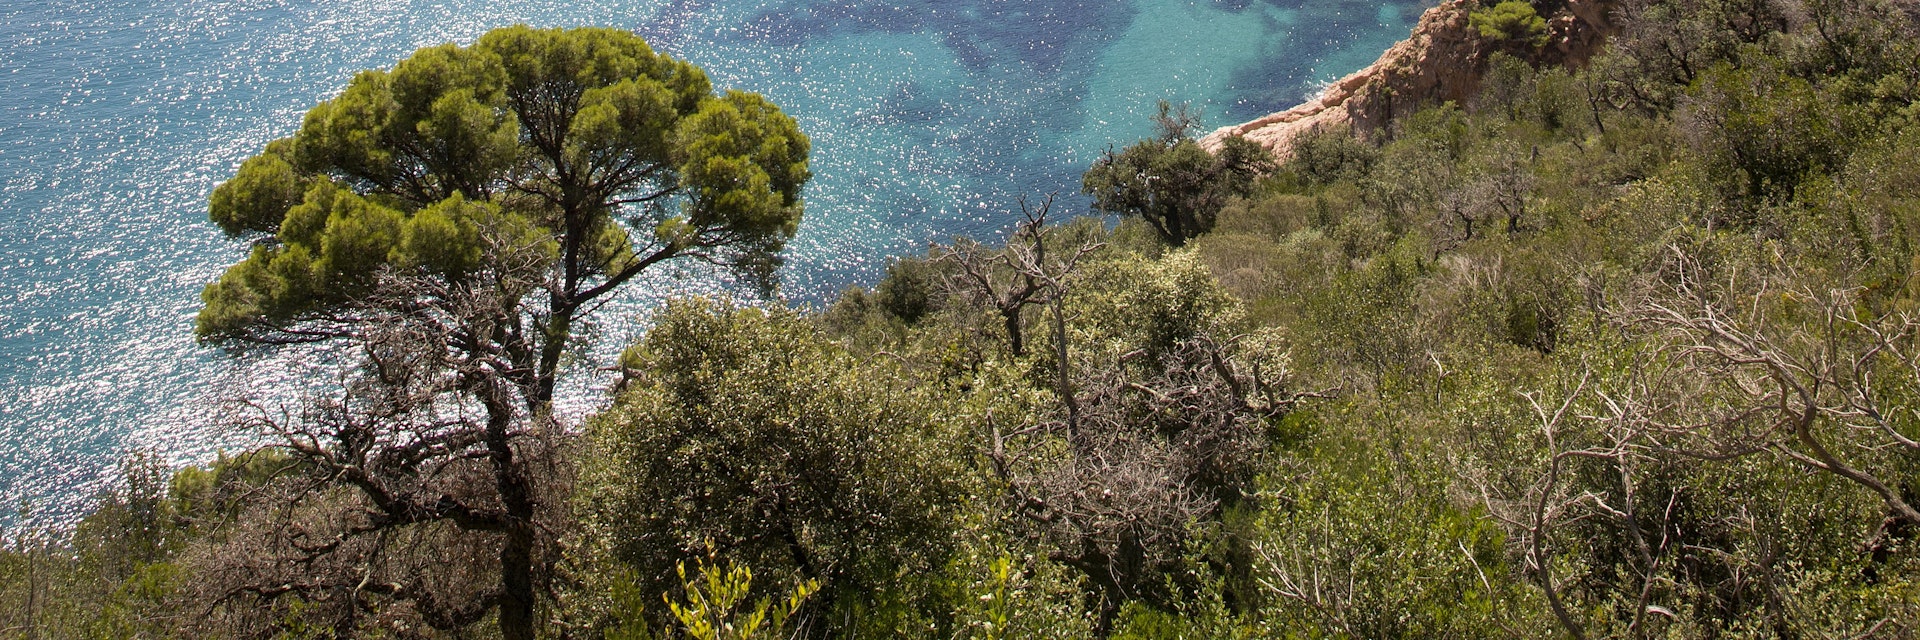 Overview of secluded cove in Aigua Blava Bay.